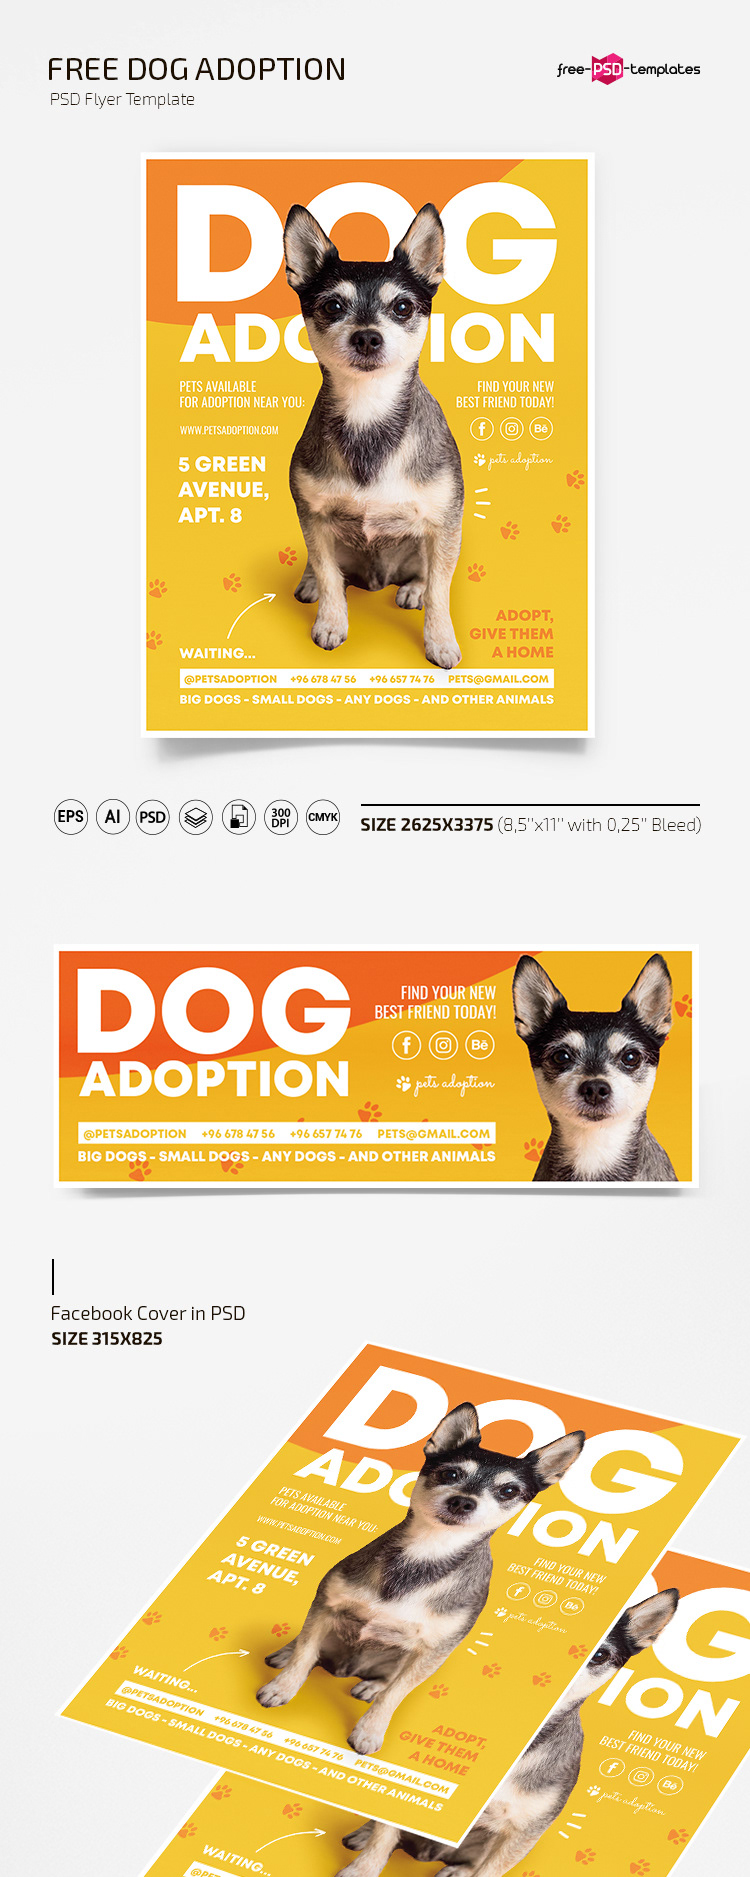 FREE DOG ADOPTION FLYER TEMPLATE IN PSD + AI on Behance Regarding Dog Adoption Flyer Template